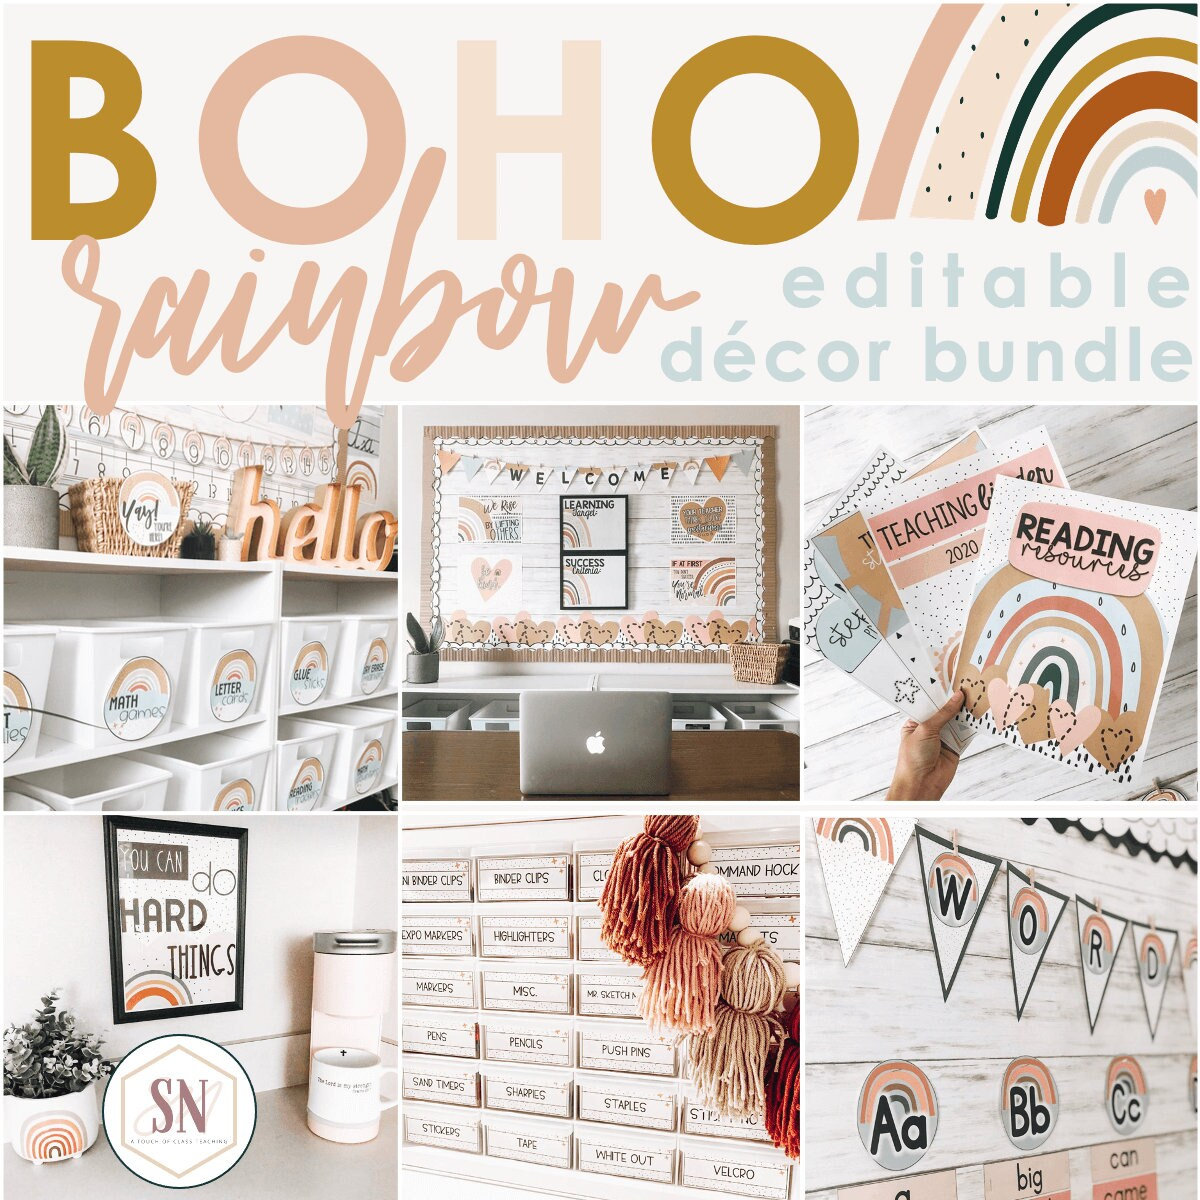 Create a cozy boho decor classroom for a welcoming learning space